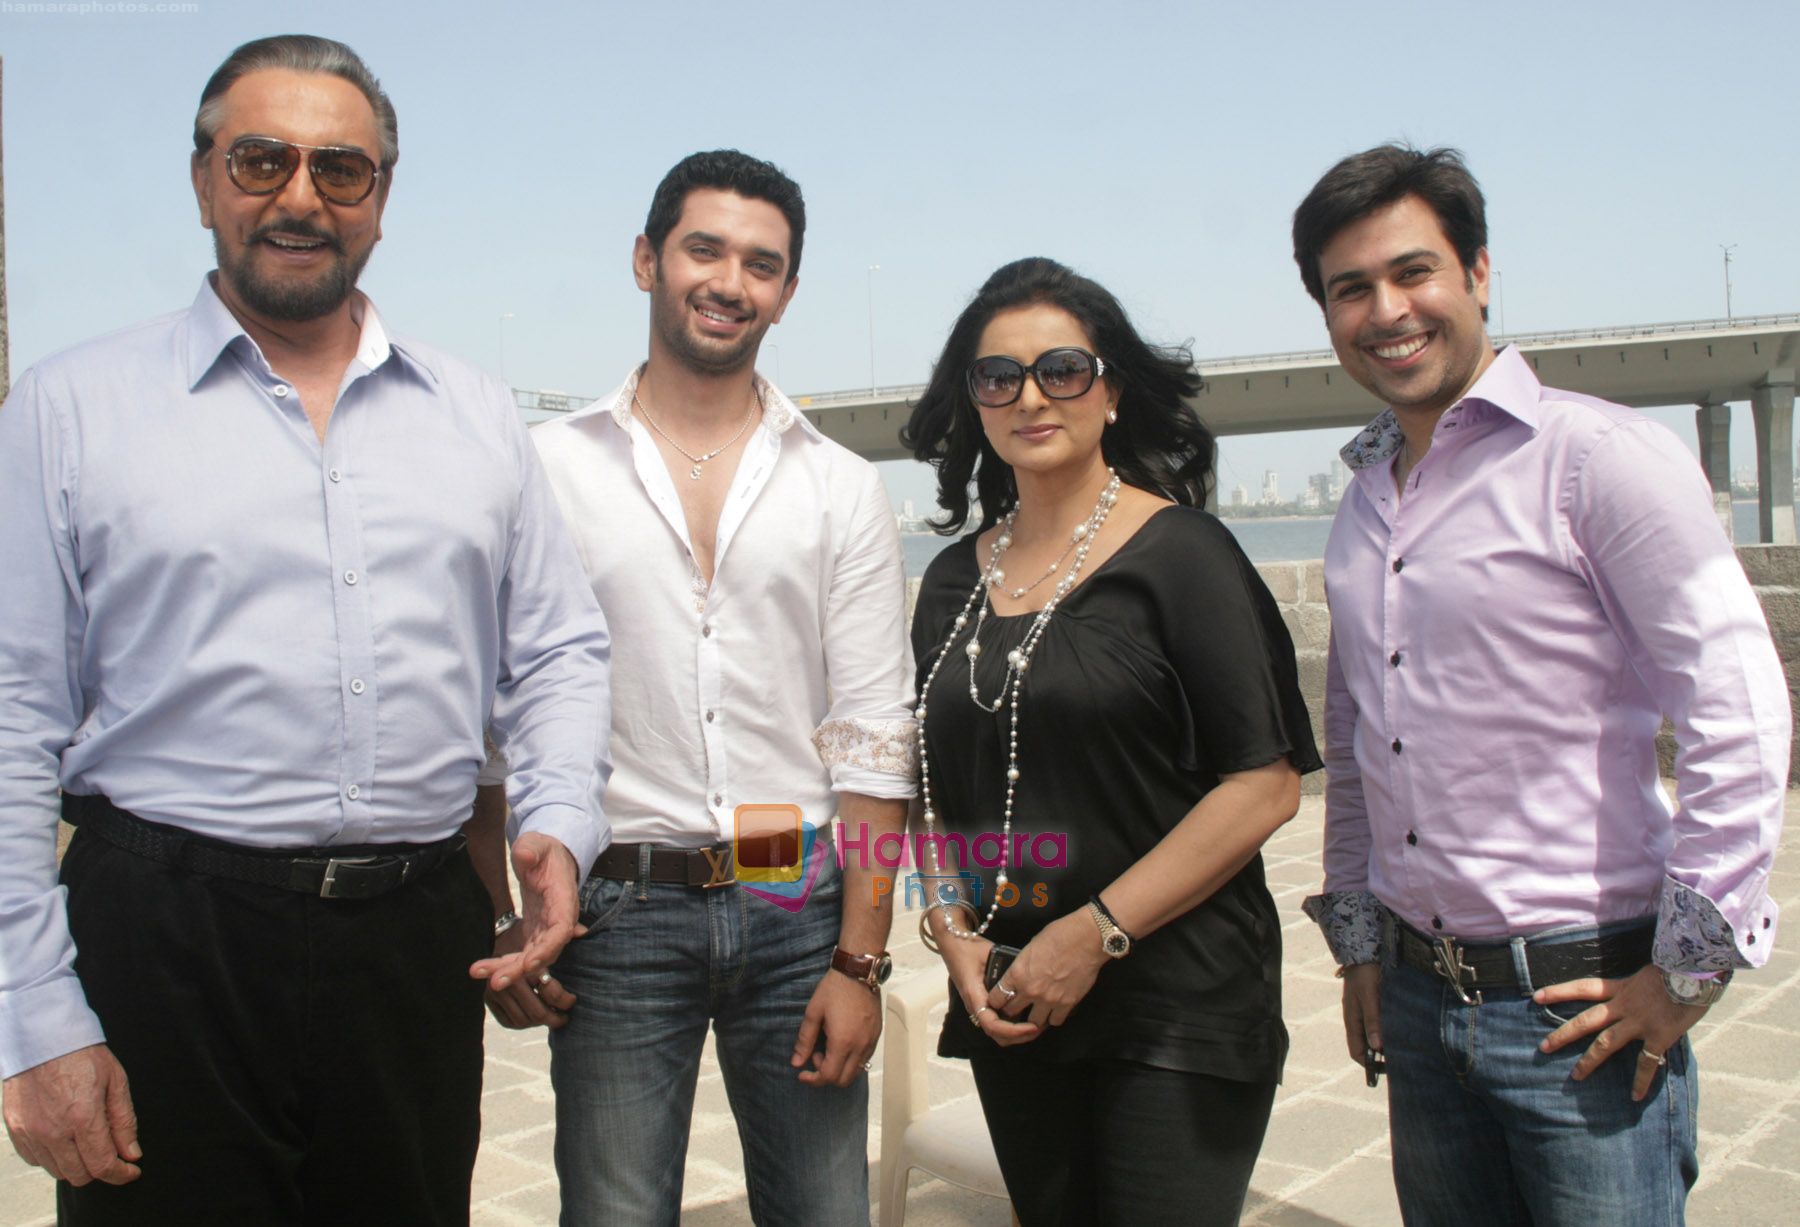 Kabir bedi, Chirag Paswan, Poonam Dhilon, Neeraj Paswan Shoots for his debut film One and Only in Bandra Fort on 15th May 2011